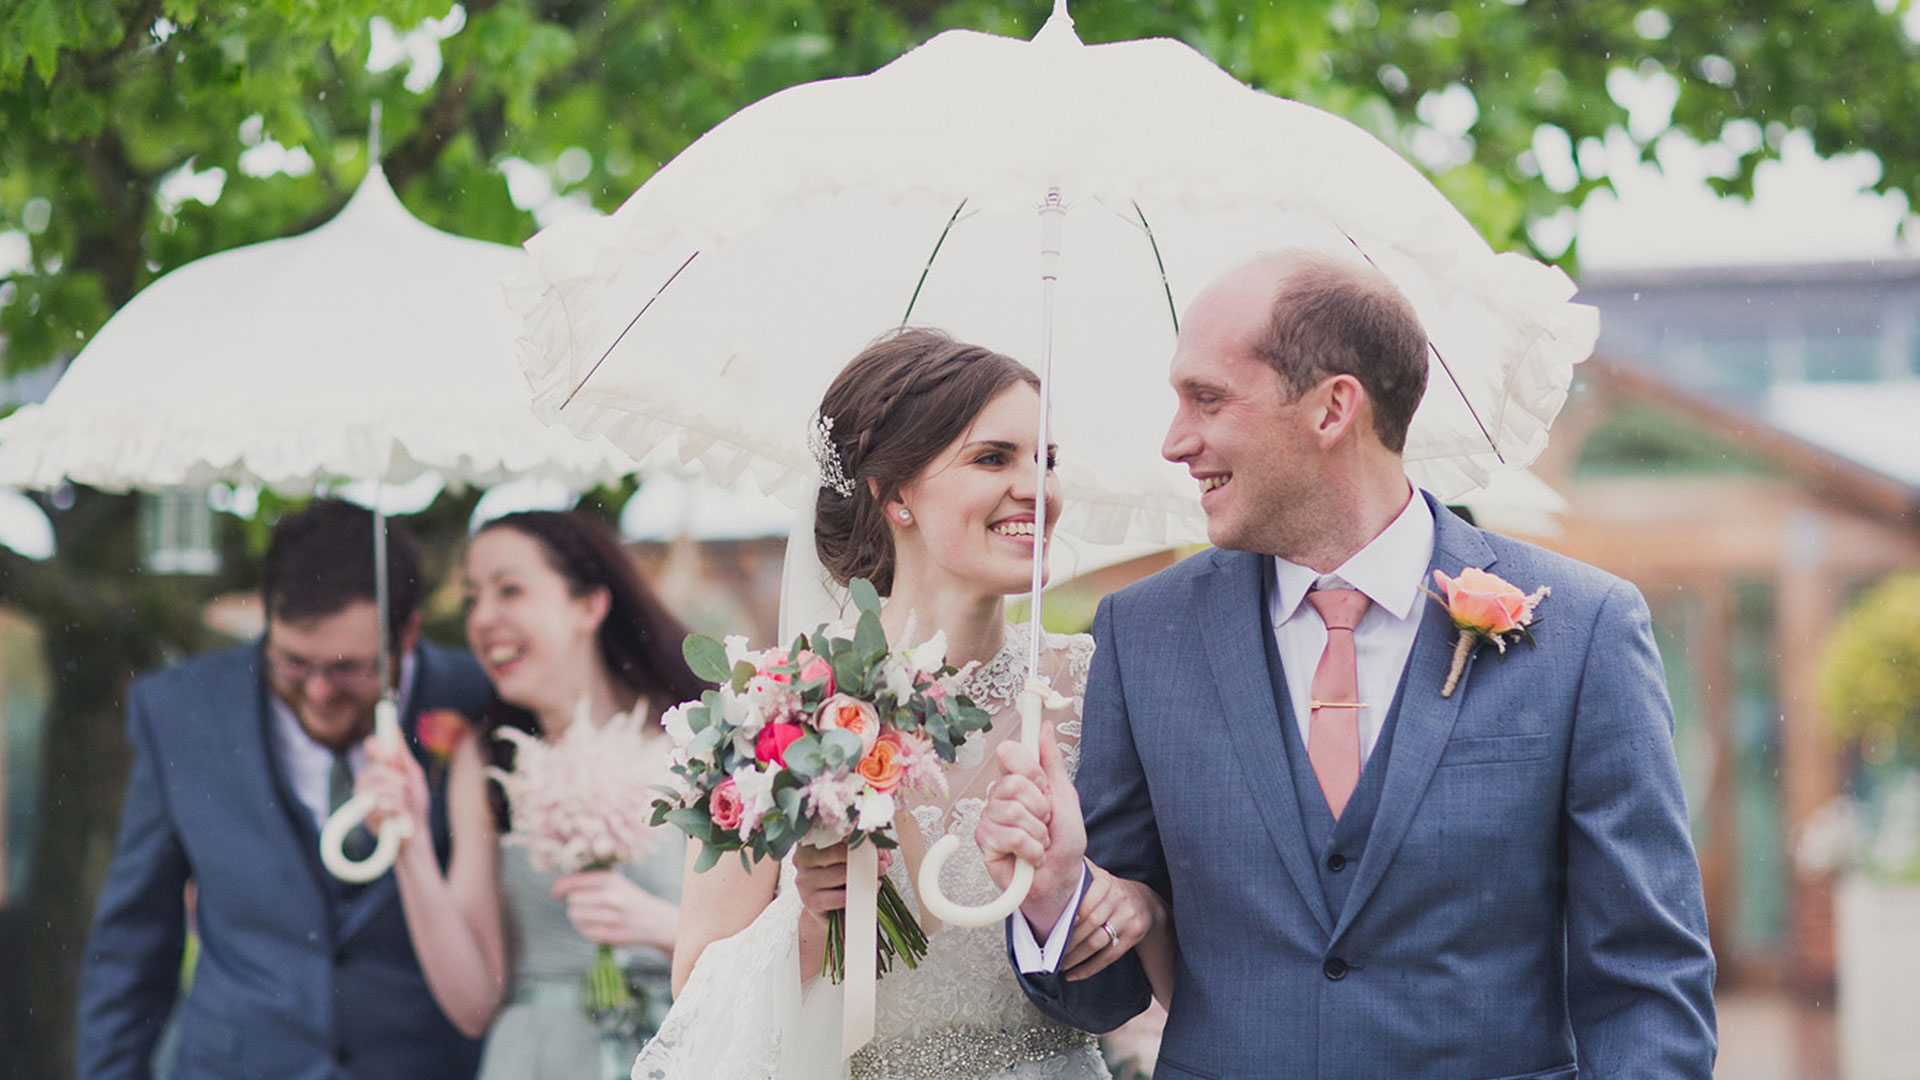 A bride and groom walk together - pink and peach wedding colours are perfect for a summer wedding